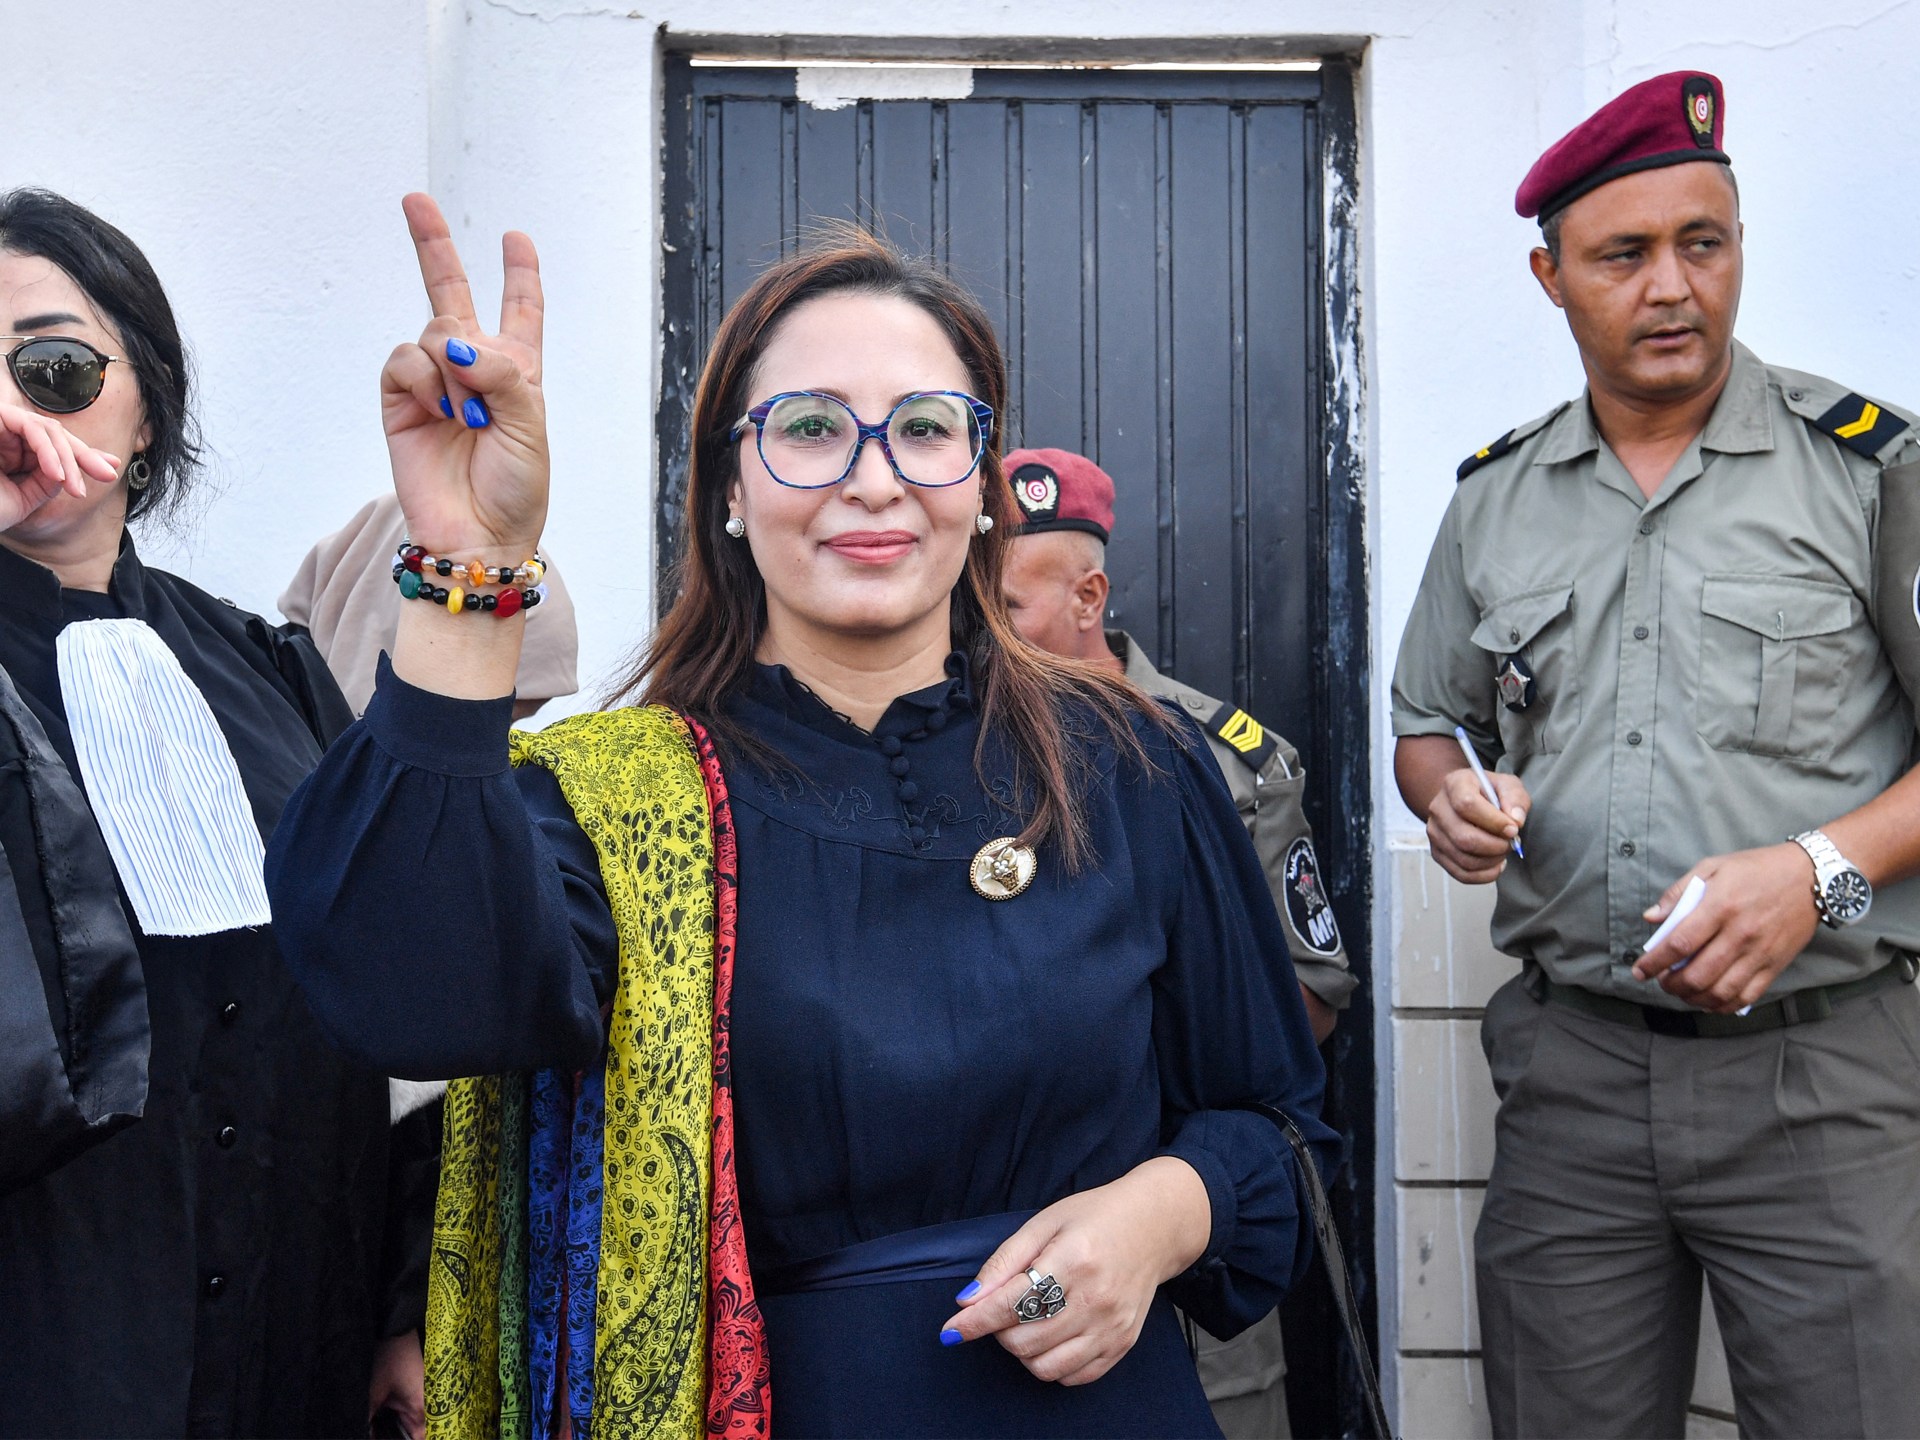 Tunisian opposition leader Chaima Issa gets suspended jail term | Freedom of the Press News #Tunisian #opposition #leader #Chaima #Issa #suspended #jail #term #Freedom #Press #News